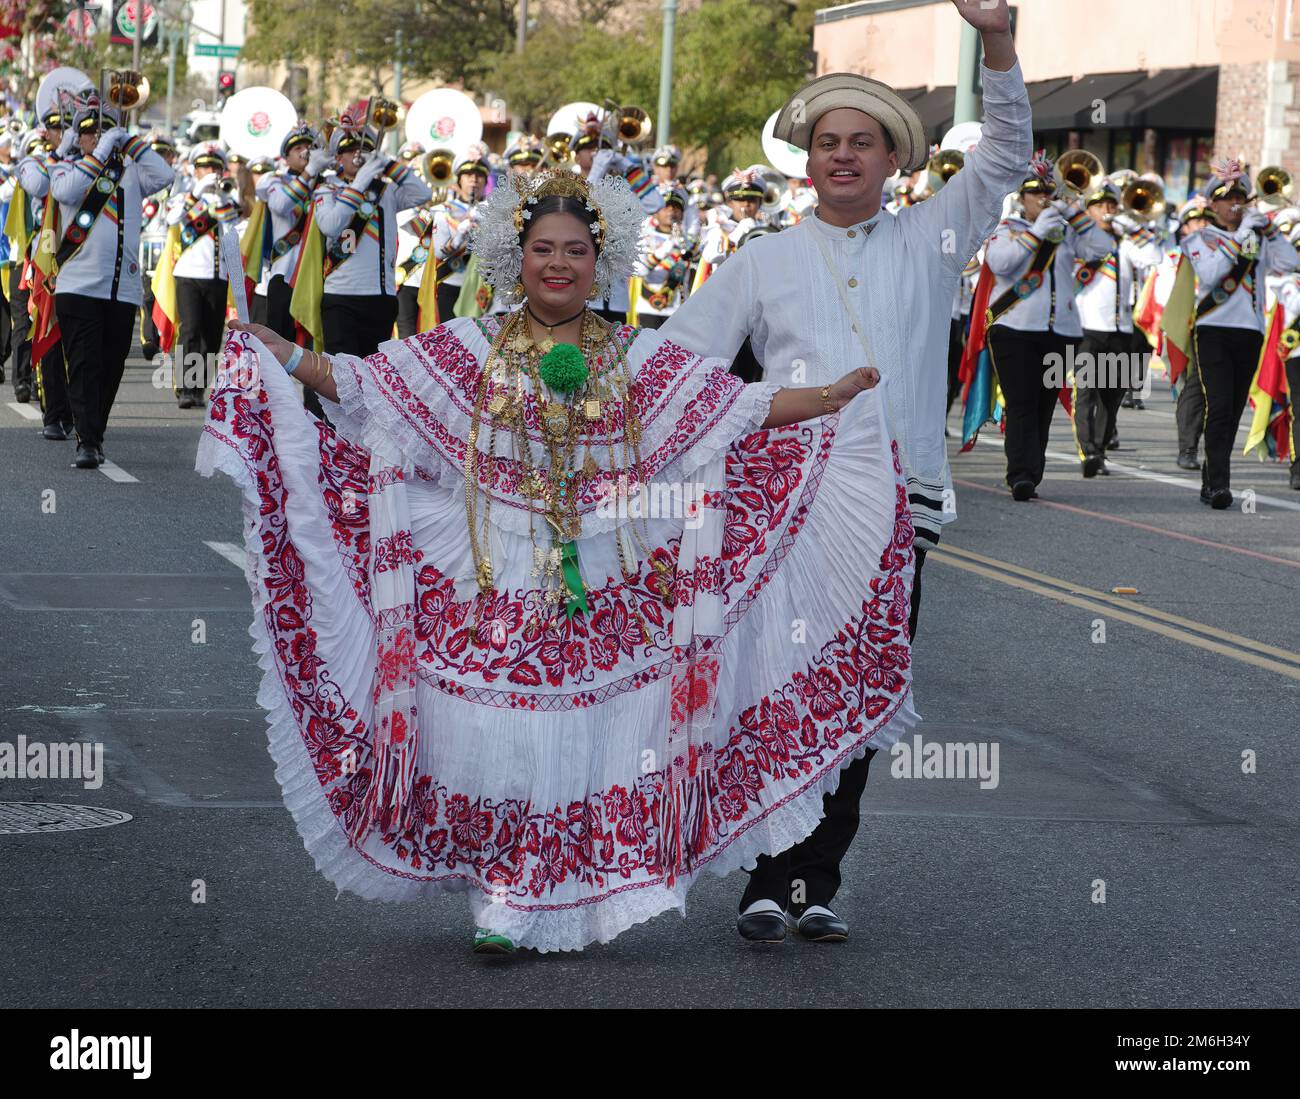 Unidentified young Panamanian dancers wearing traditional costumes and jewelry shown performing during the Rose Parade in Pasadena. Stock Photo